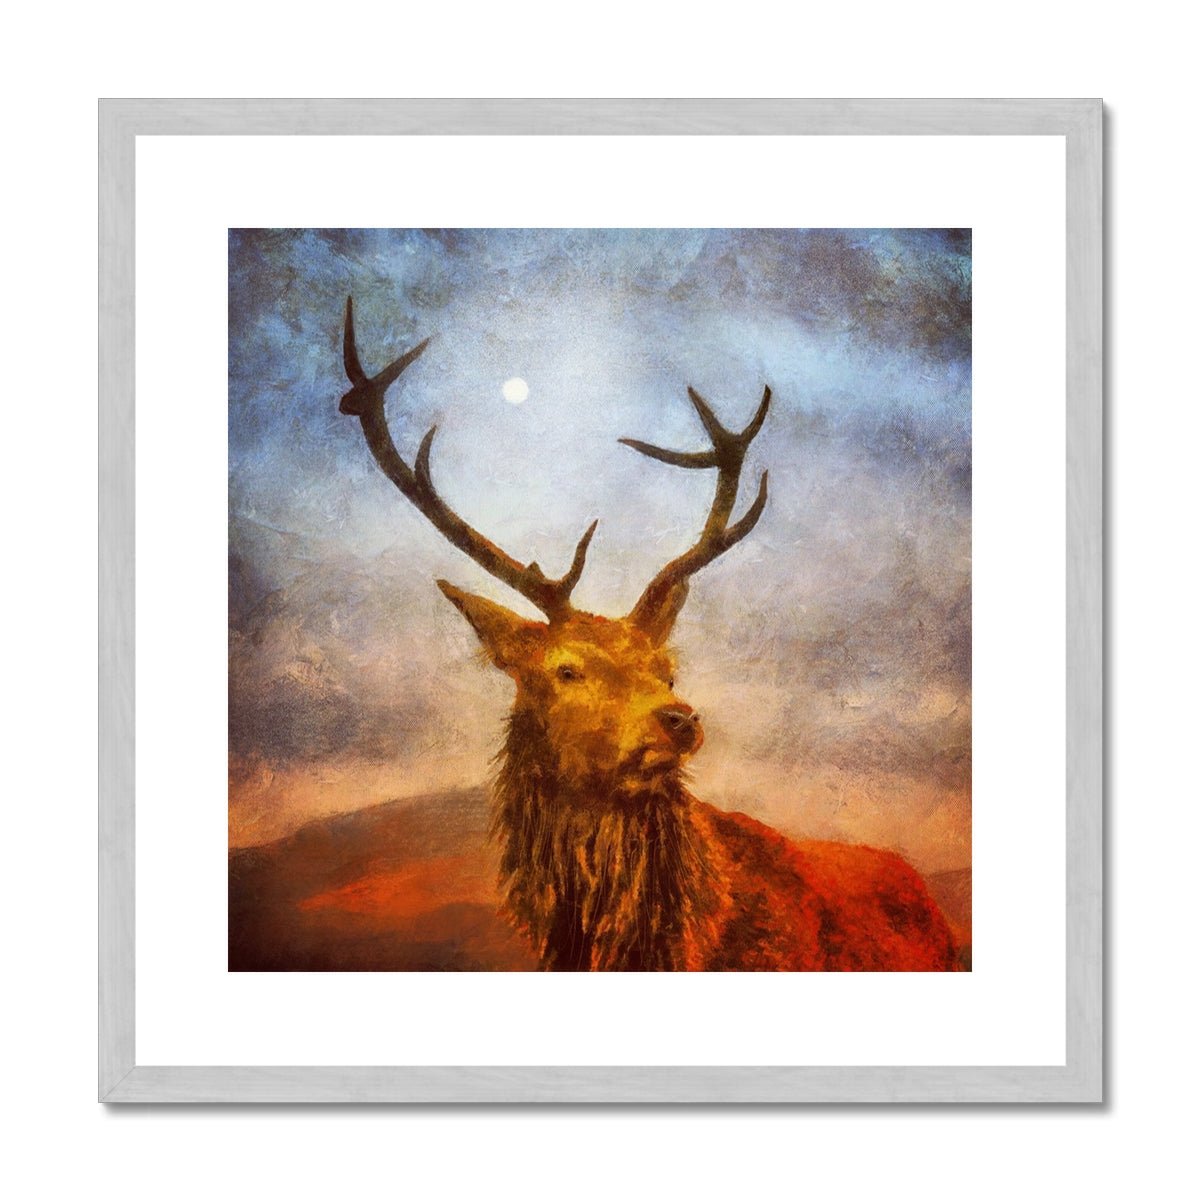 A Moonlit Highland Stag Painting | Antique Framed & Mounted Prints From Scotland-Antique Framed & Mounted Prints-Scottish Highlands & Lowlands Art Gallery-20"x20"-Silver Frame-Paintings, Prints, Homeware, Art Gifts From Scotland By Scottish Artist Kevin Hunter